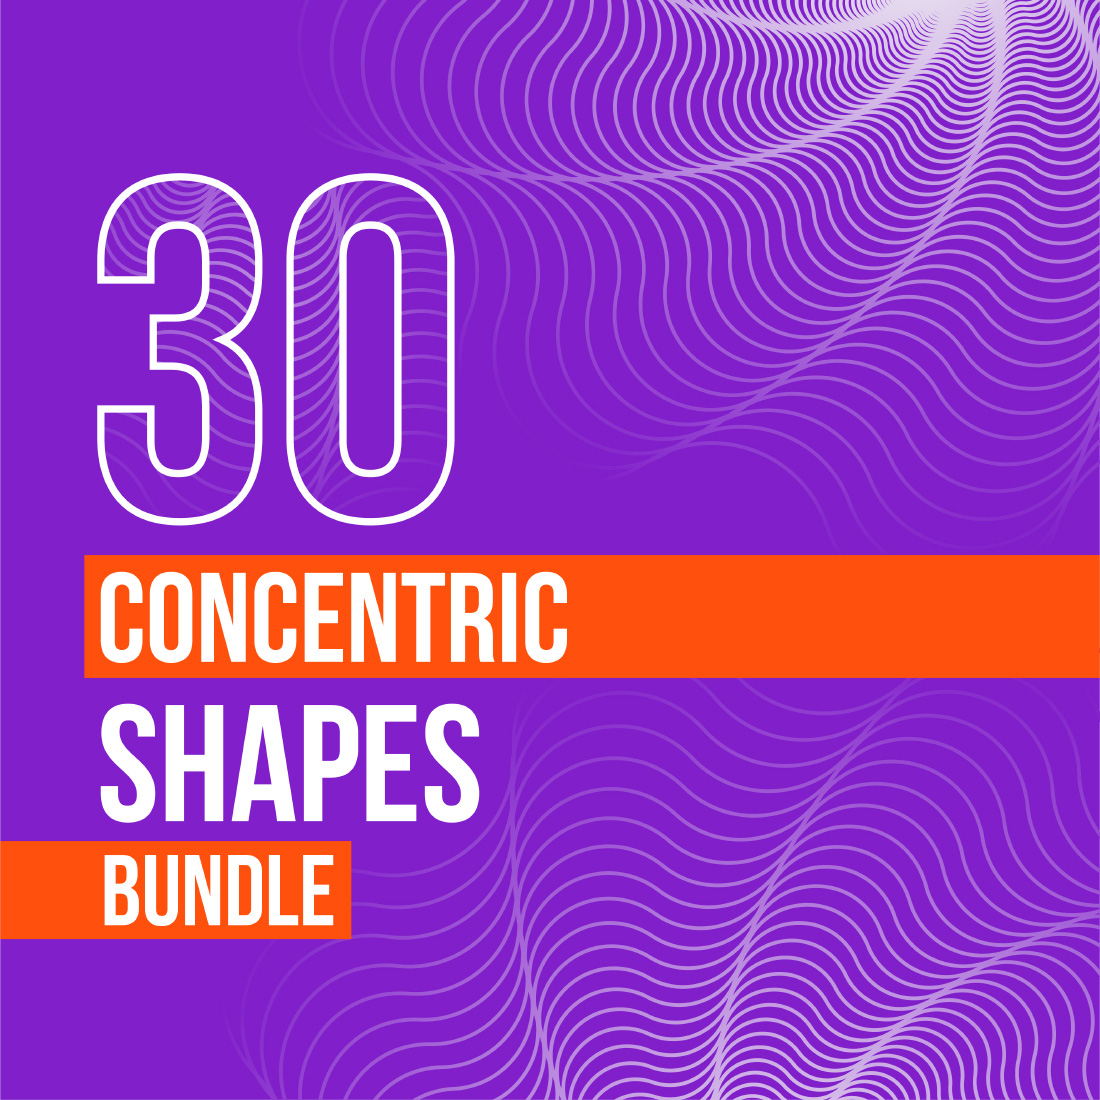 30 Concentric Shapes Cover image.